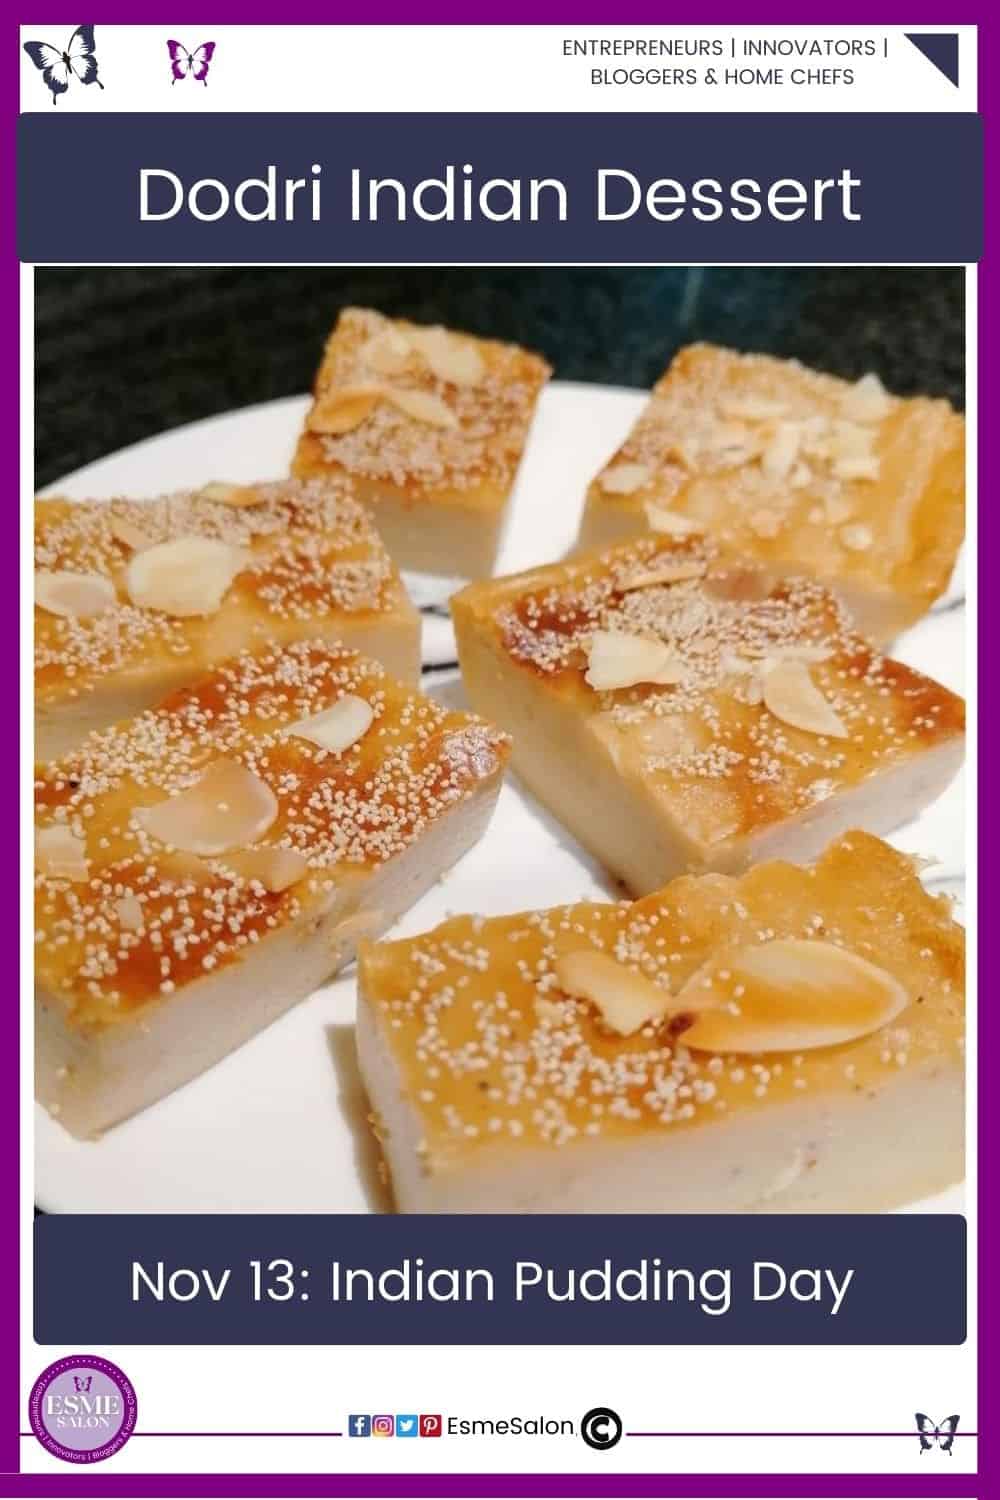 an image of an Indian dessert cut into cubes and sprinkled with white sesame seeds and flaked almonds